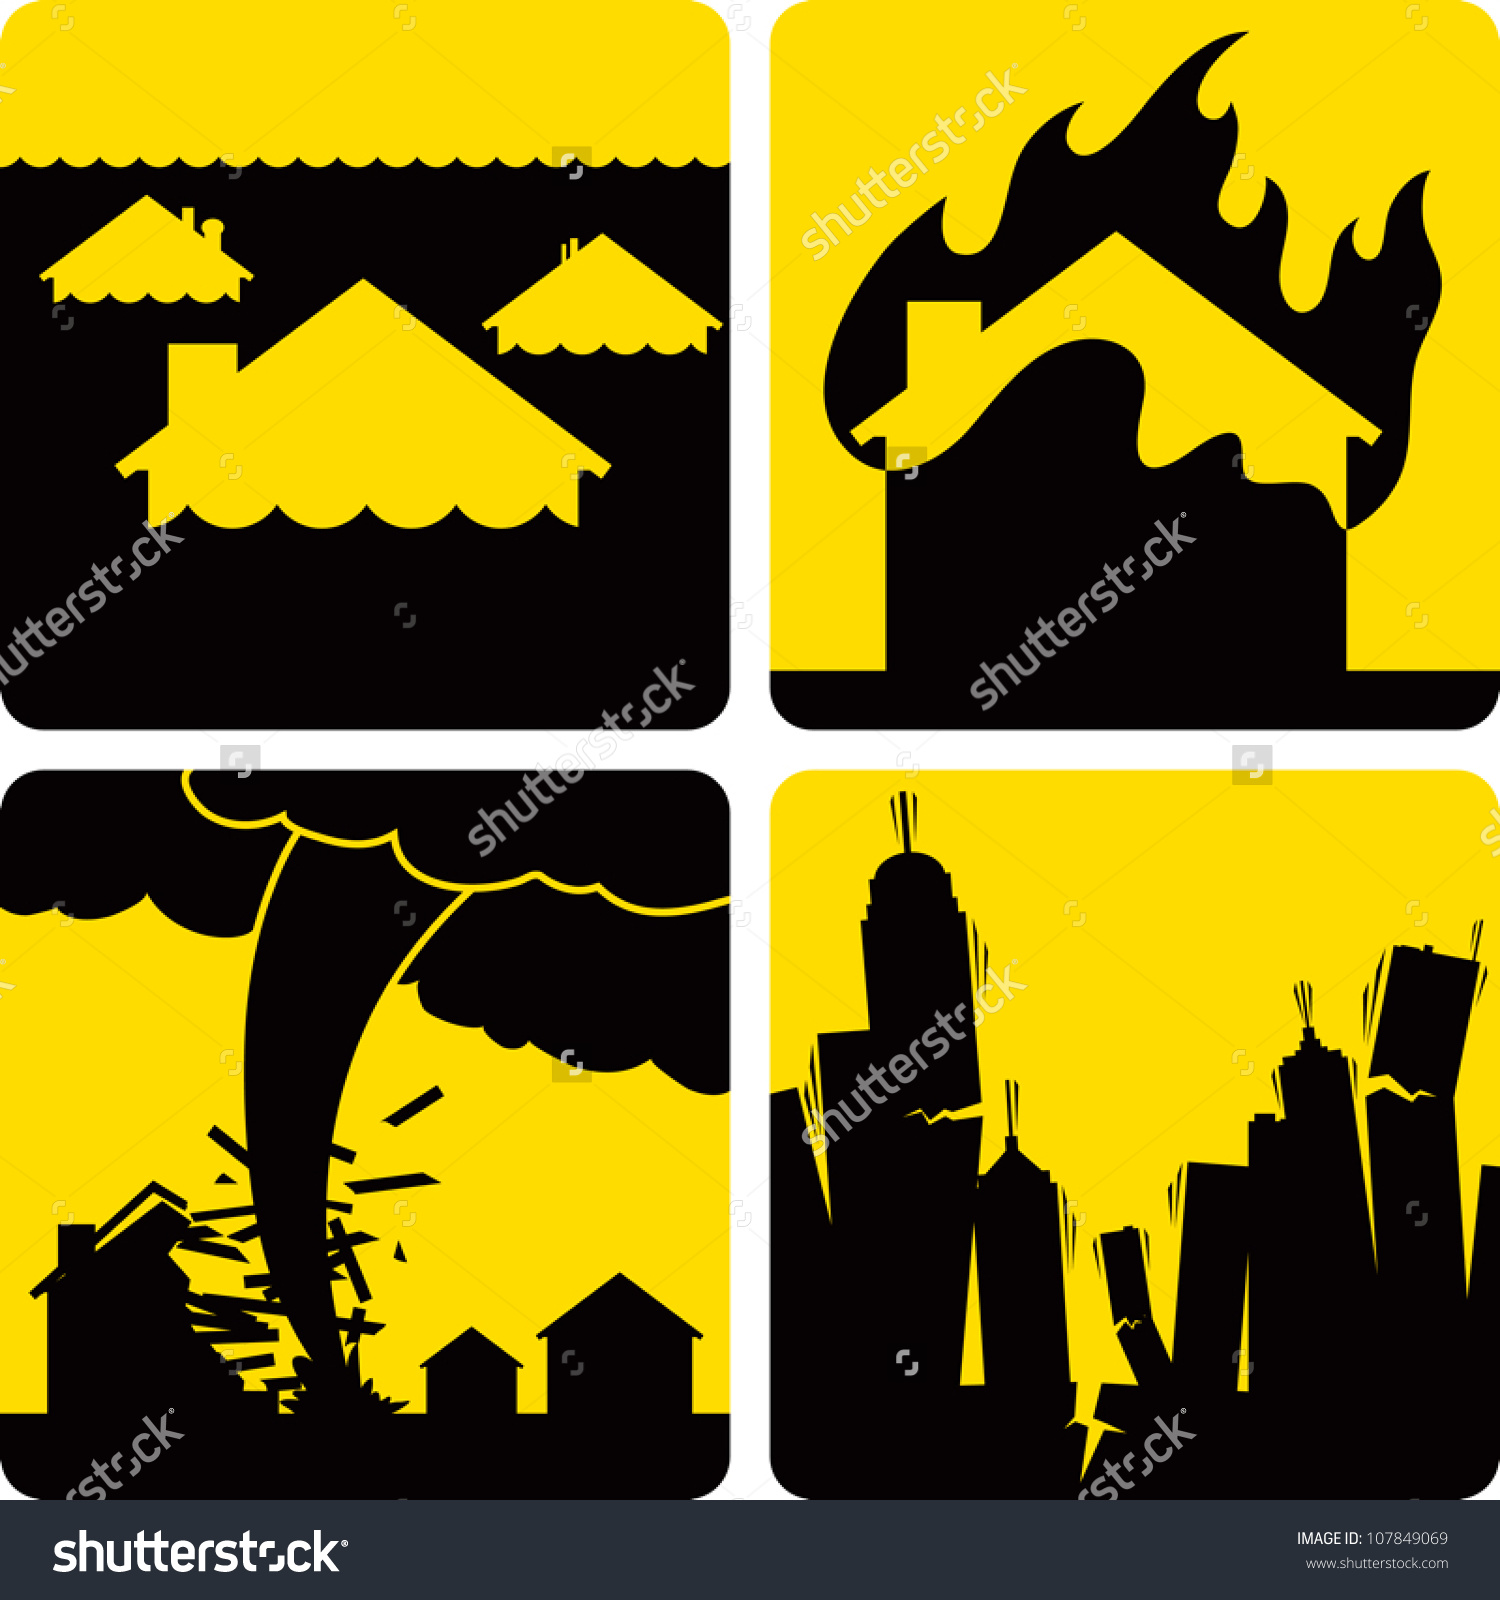 Disaster Clip Art Images.